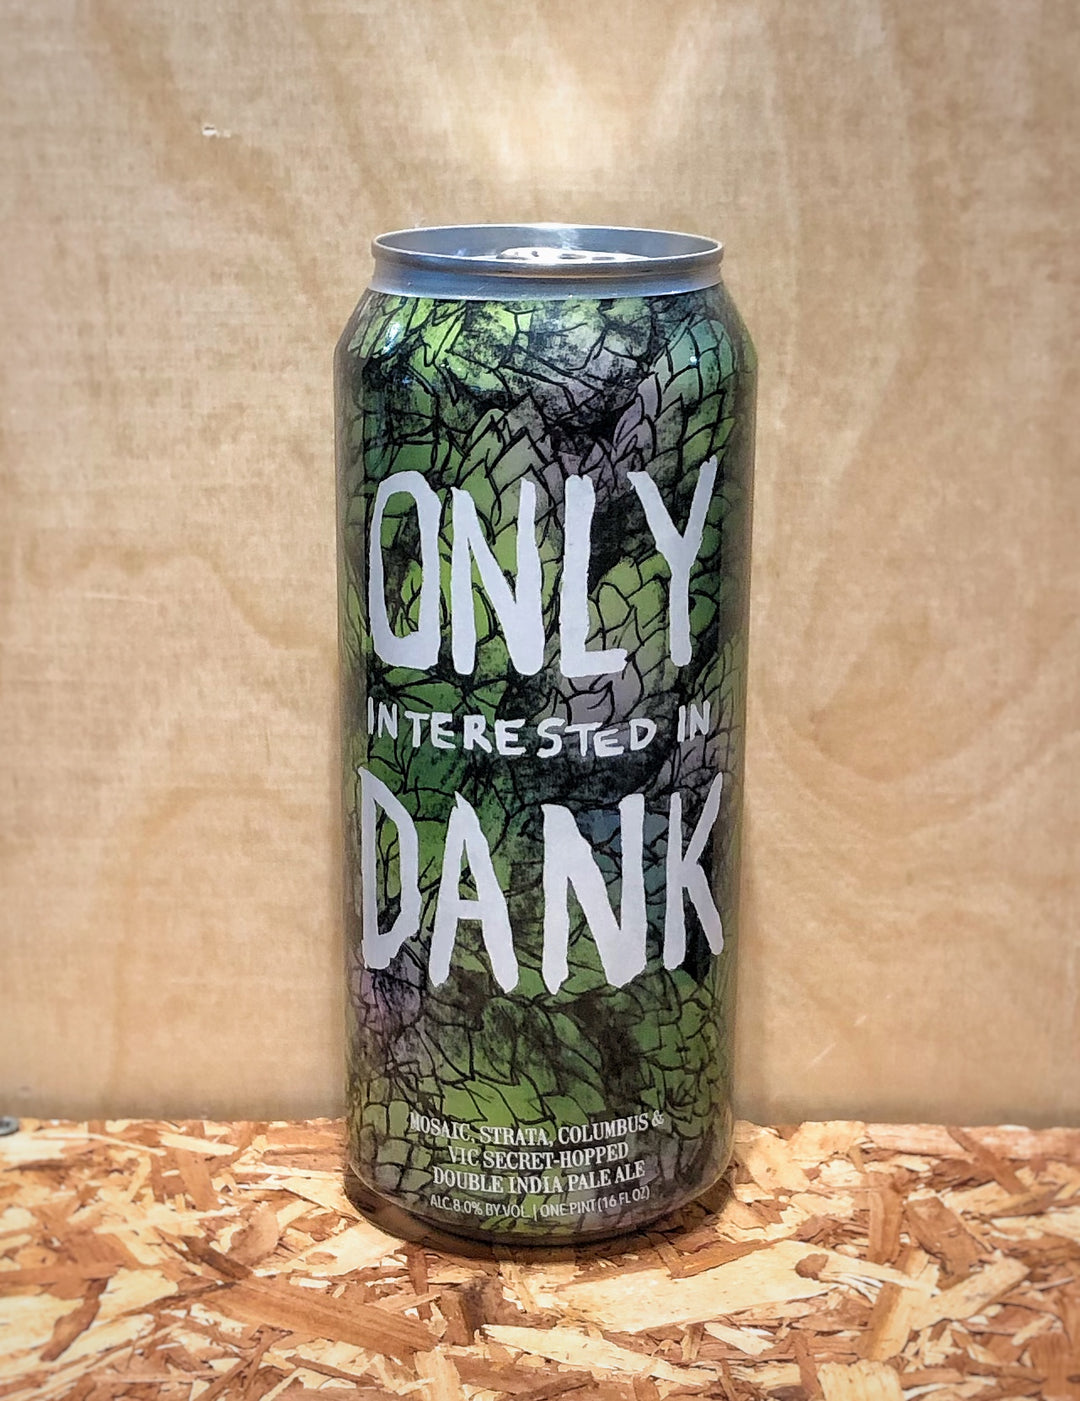 Hop Butcher For the World 'Only Interested in Dank' Mosaic, Strata, Columbus, & Vic Secret Hopped Double IPA (Bedford Park, IL)